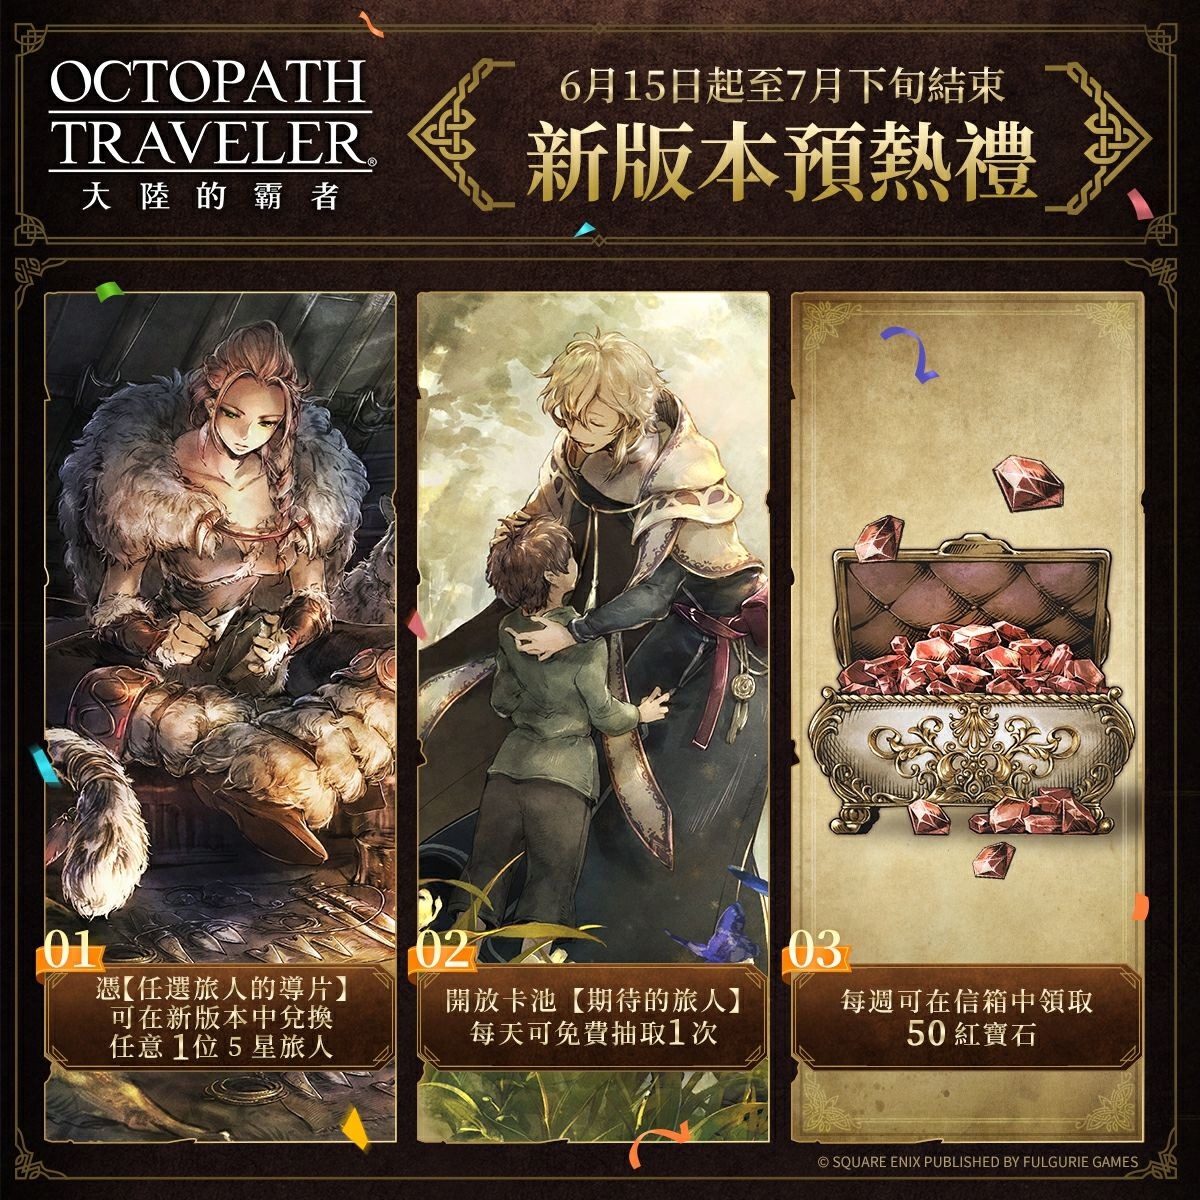 Octopath Traveler: Champions of the Continent (歧路旅人：大陸的霸